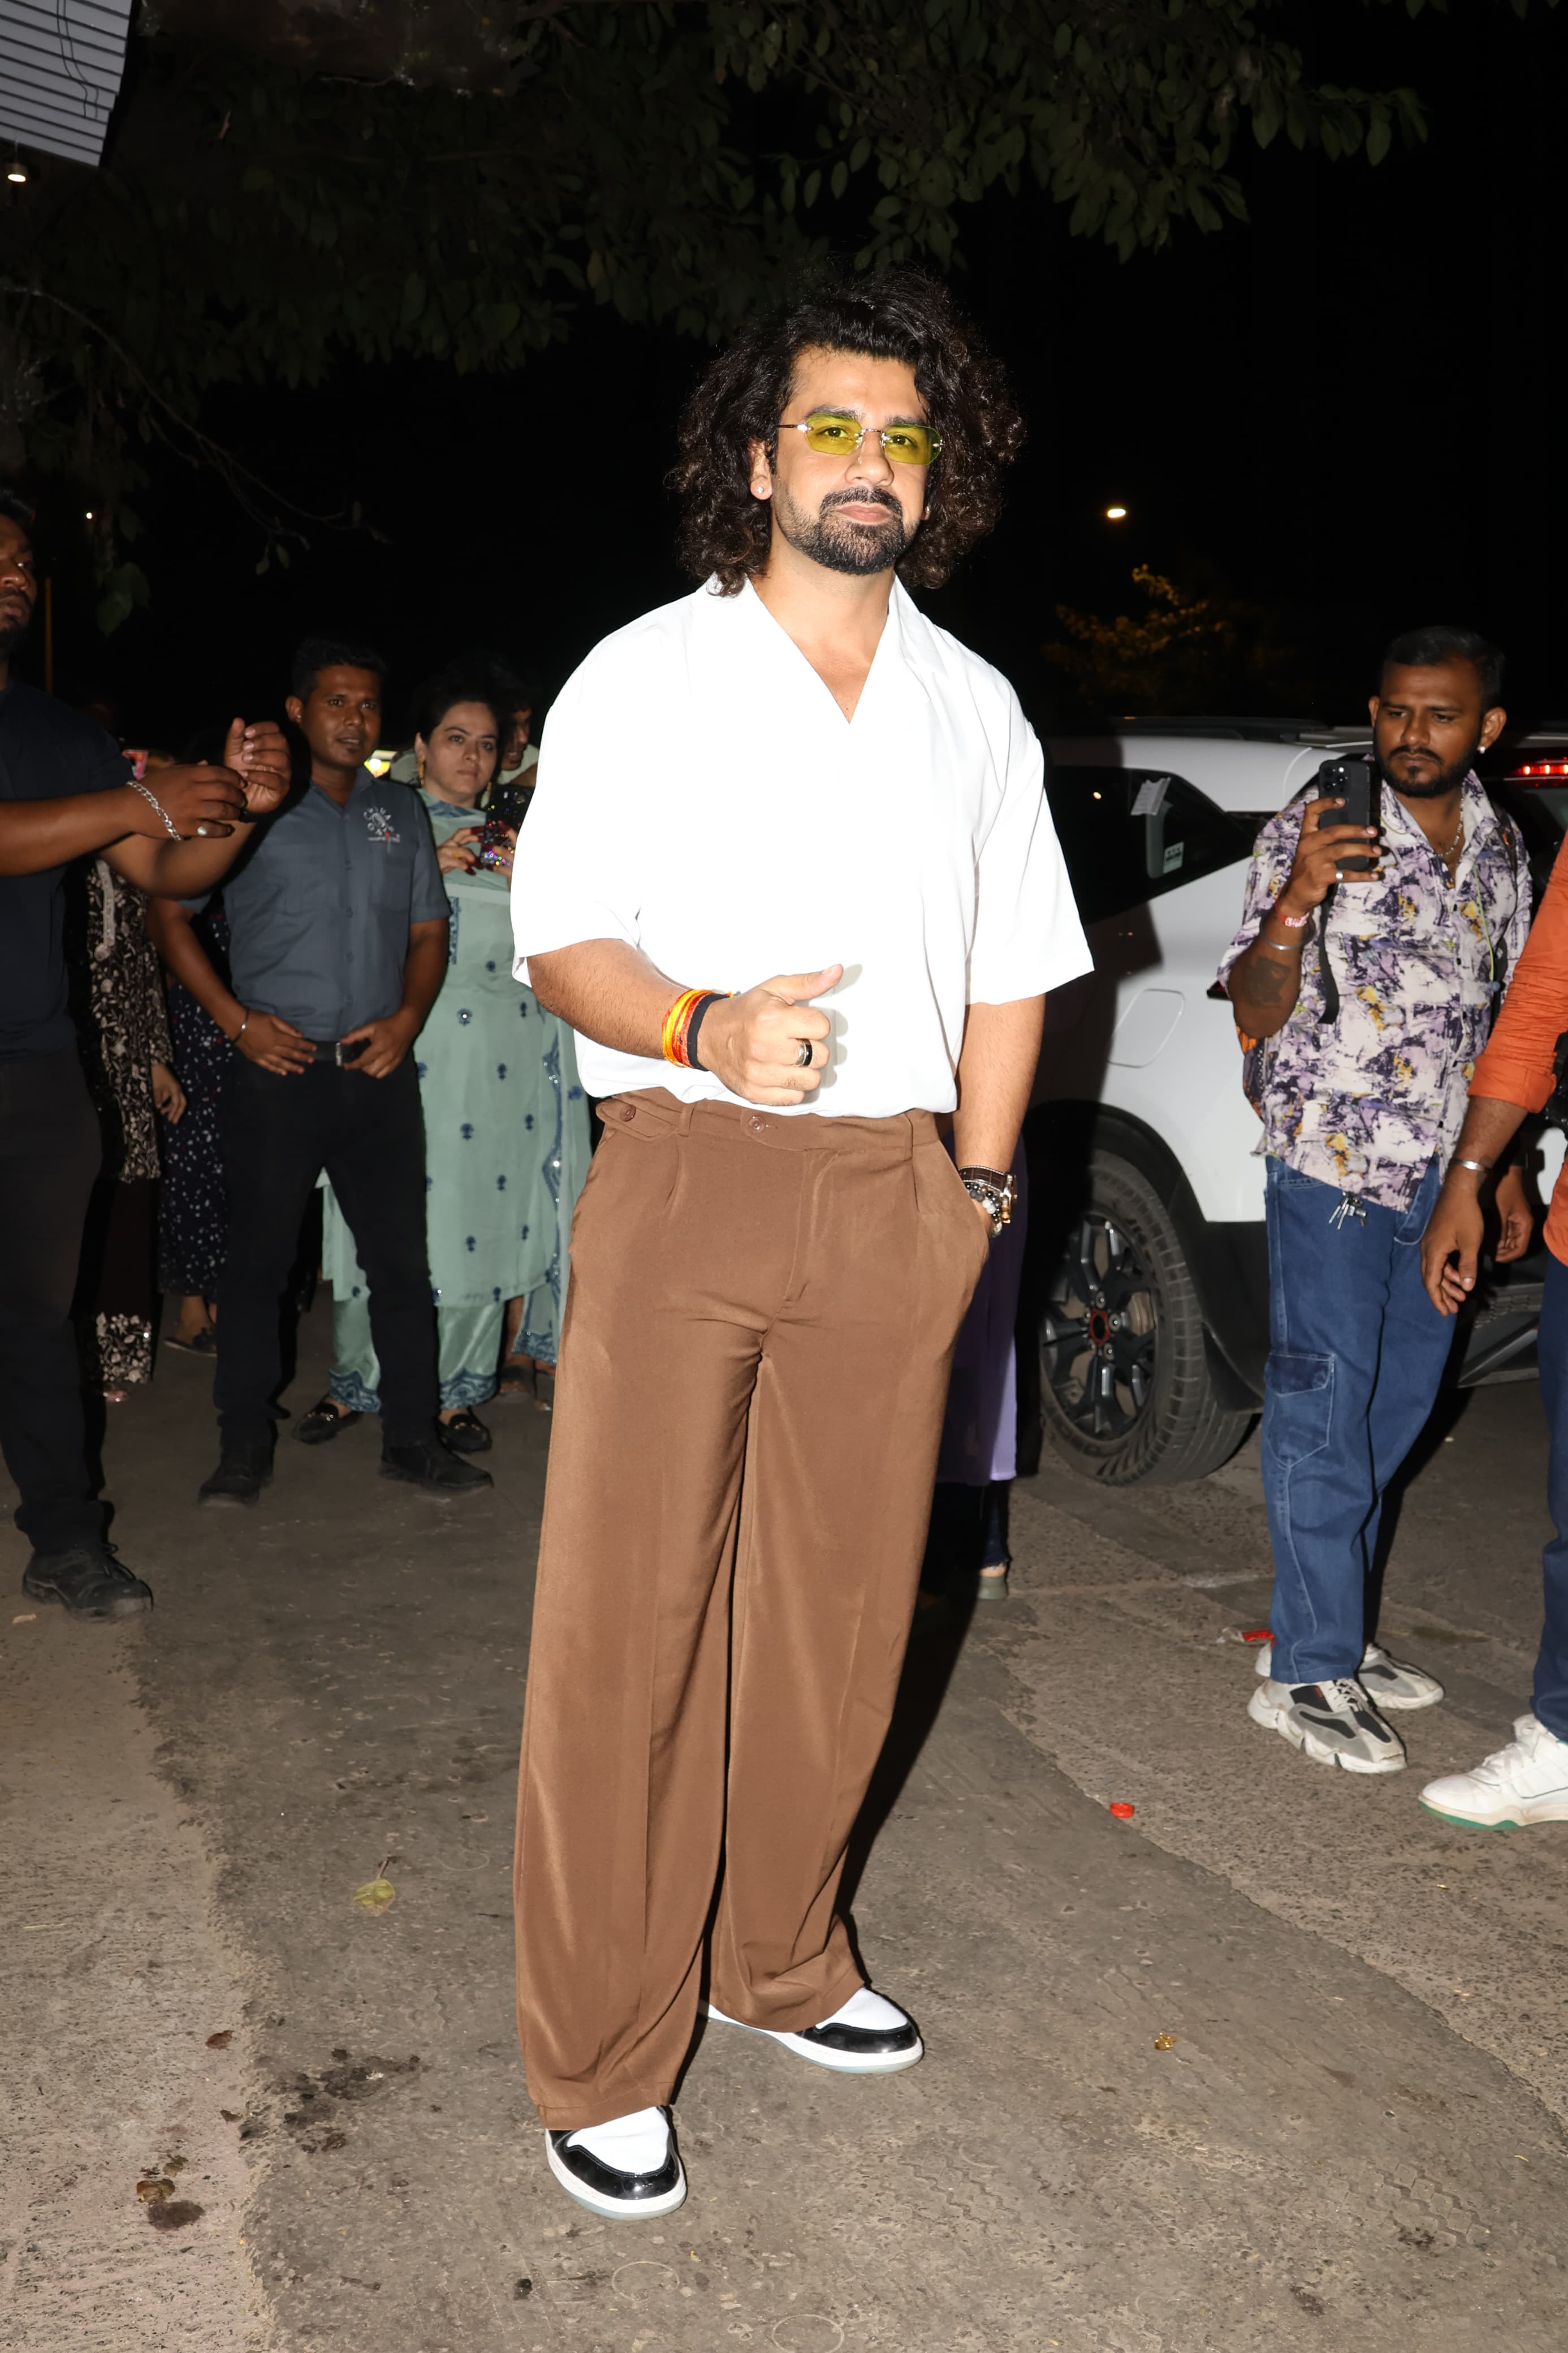 Aashish Mehrotra wore beige pant and white shirt at the grand party